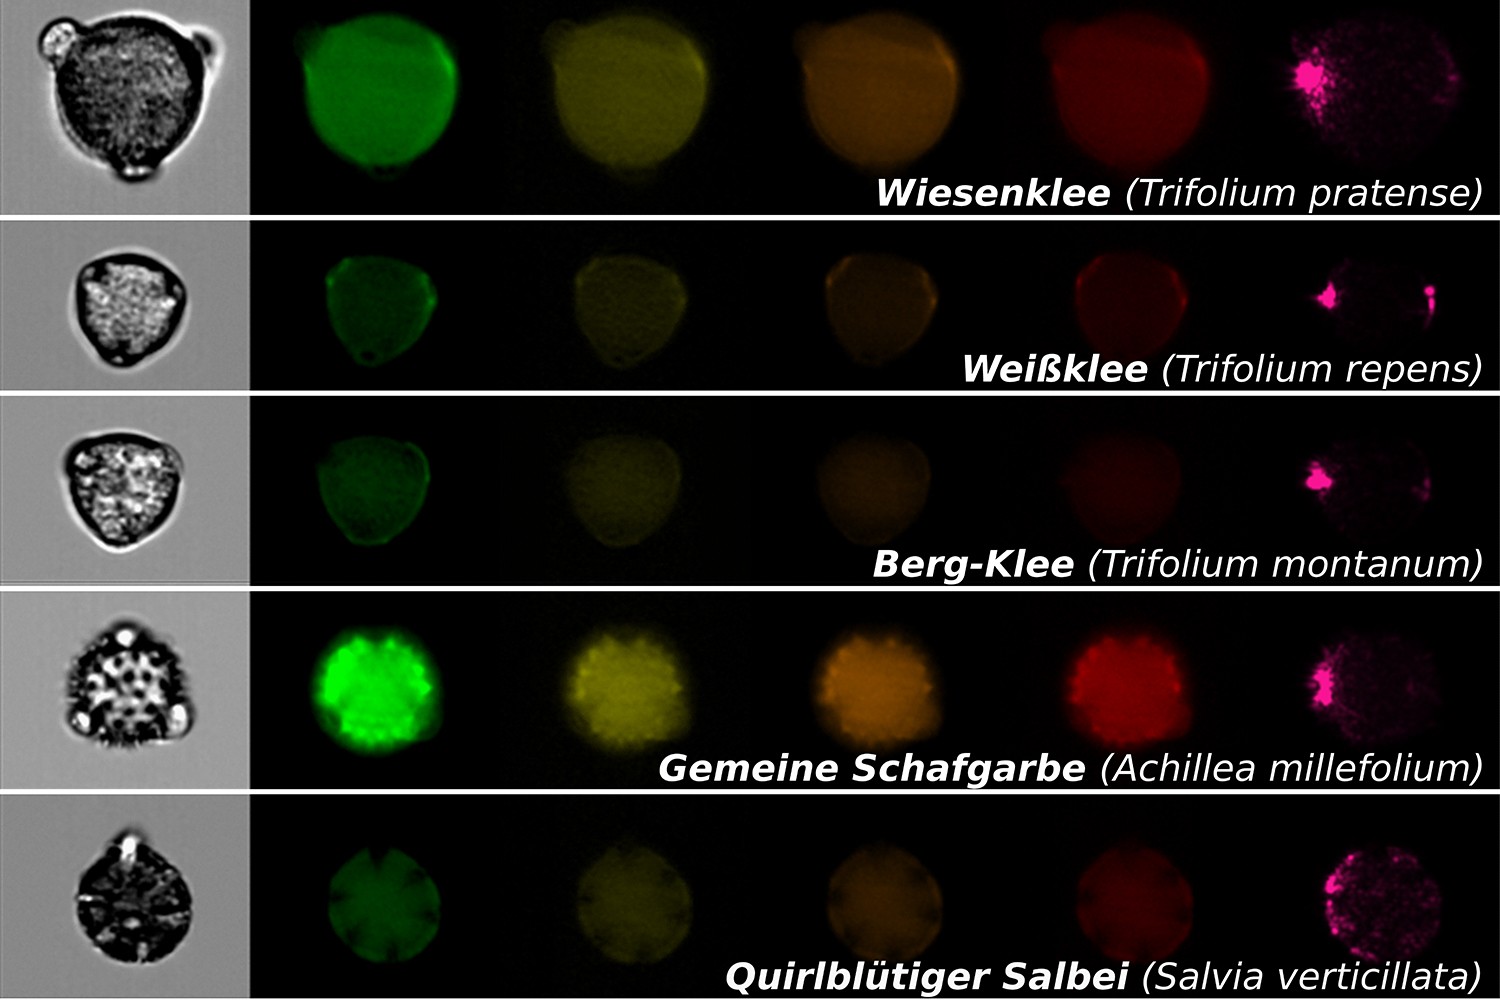 Microscopic images from pollen, which are important for pollinators, obtained by image-based particle analysis. Each row shows a single pollen grain of a specific plant with a normal microscopic image (first image on the left) and fluorescence images for different spectral ranges (colored images on the right). Photo: Susanne Dunker